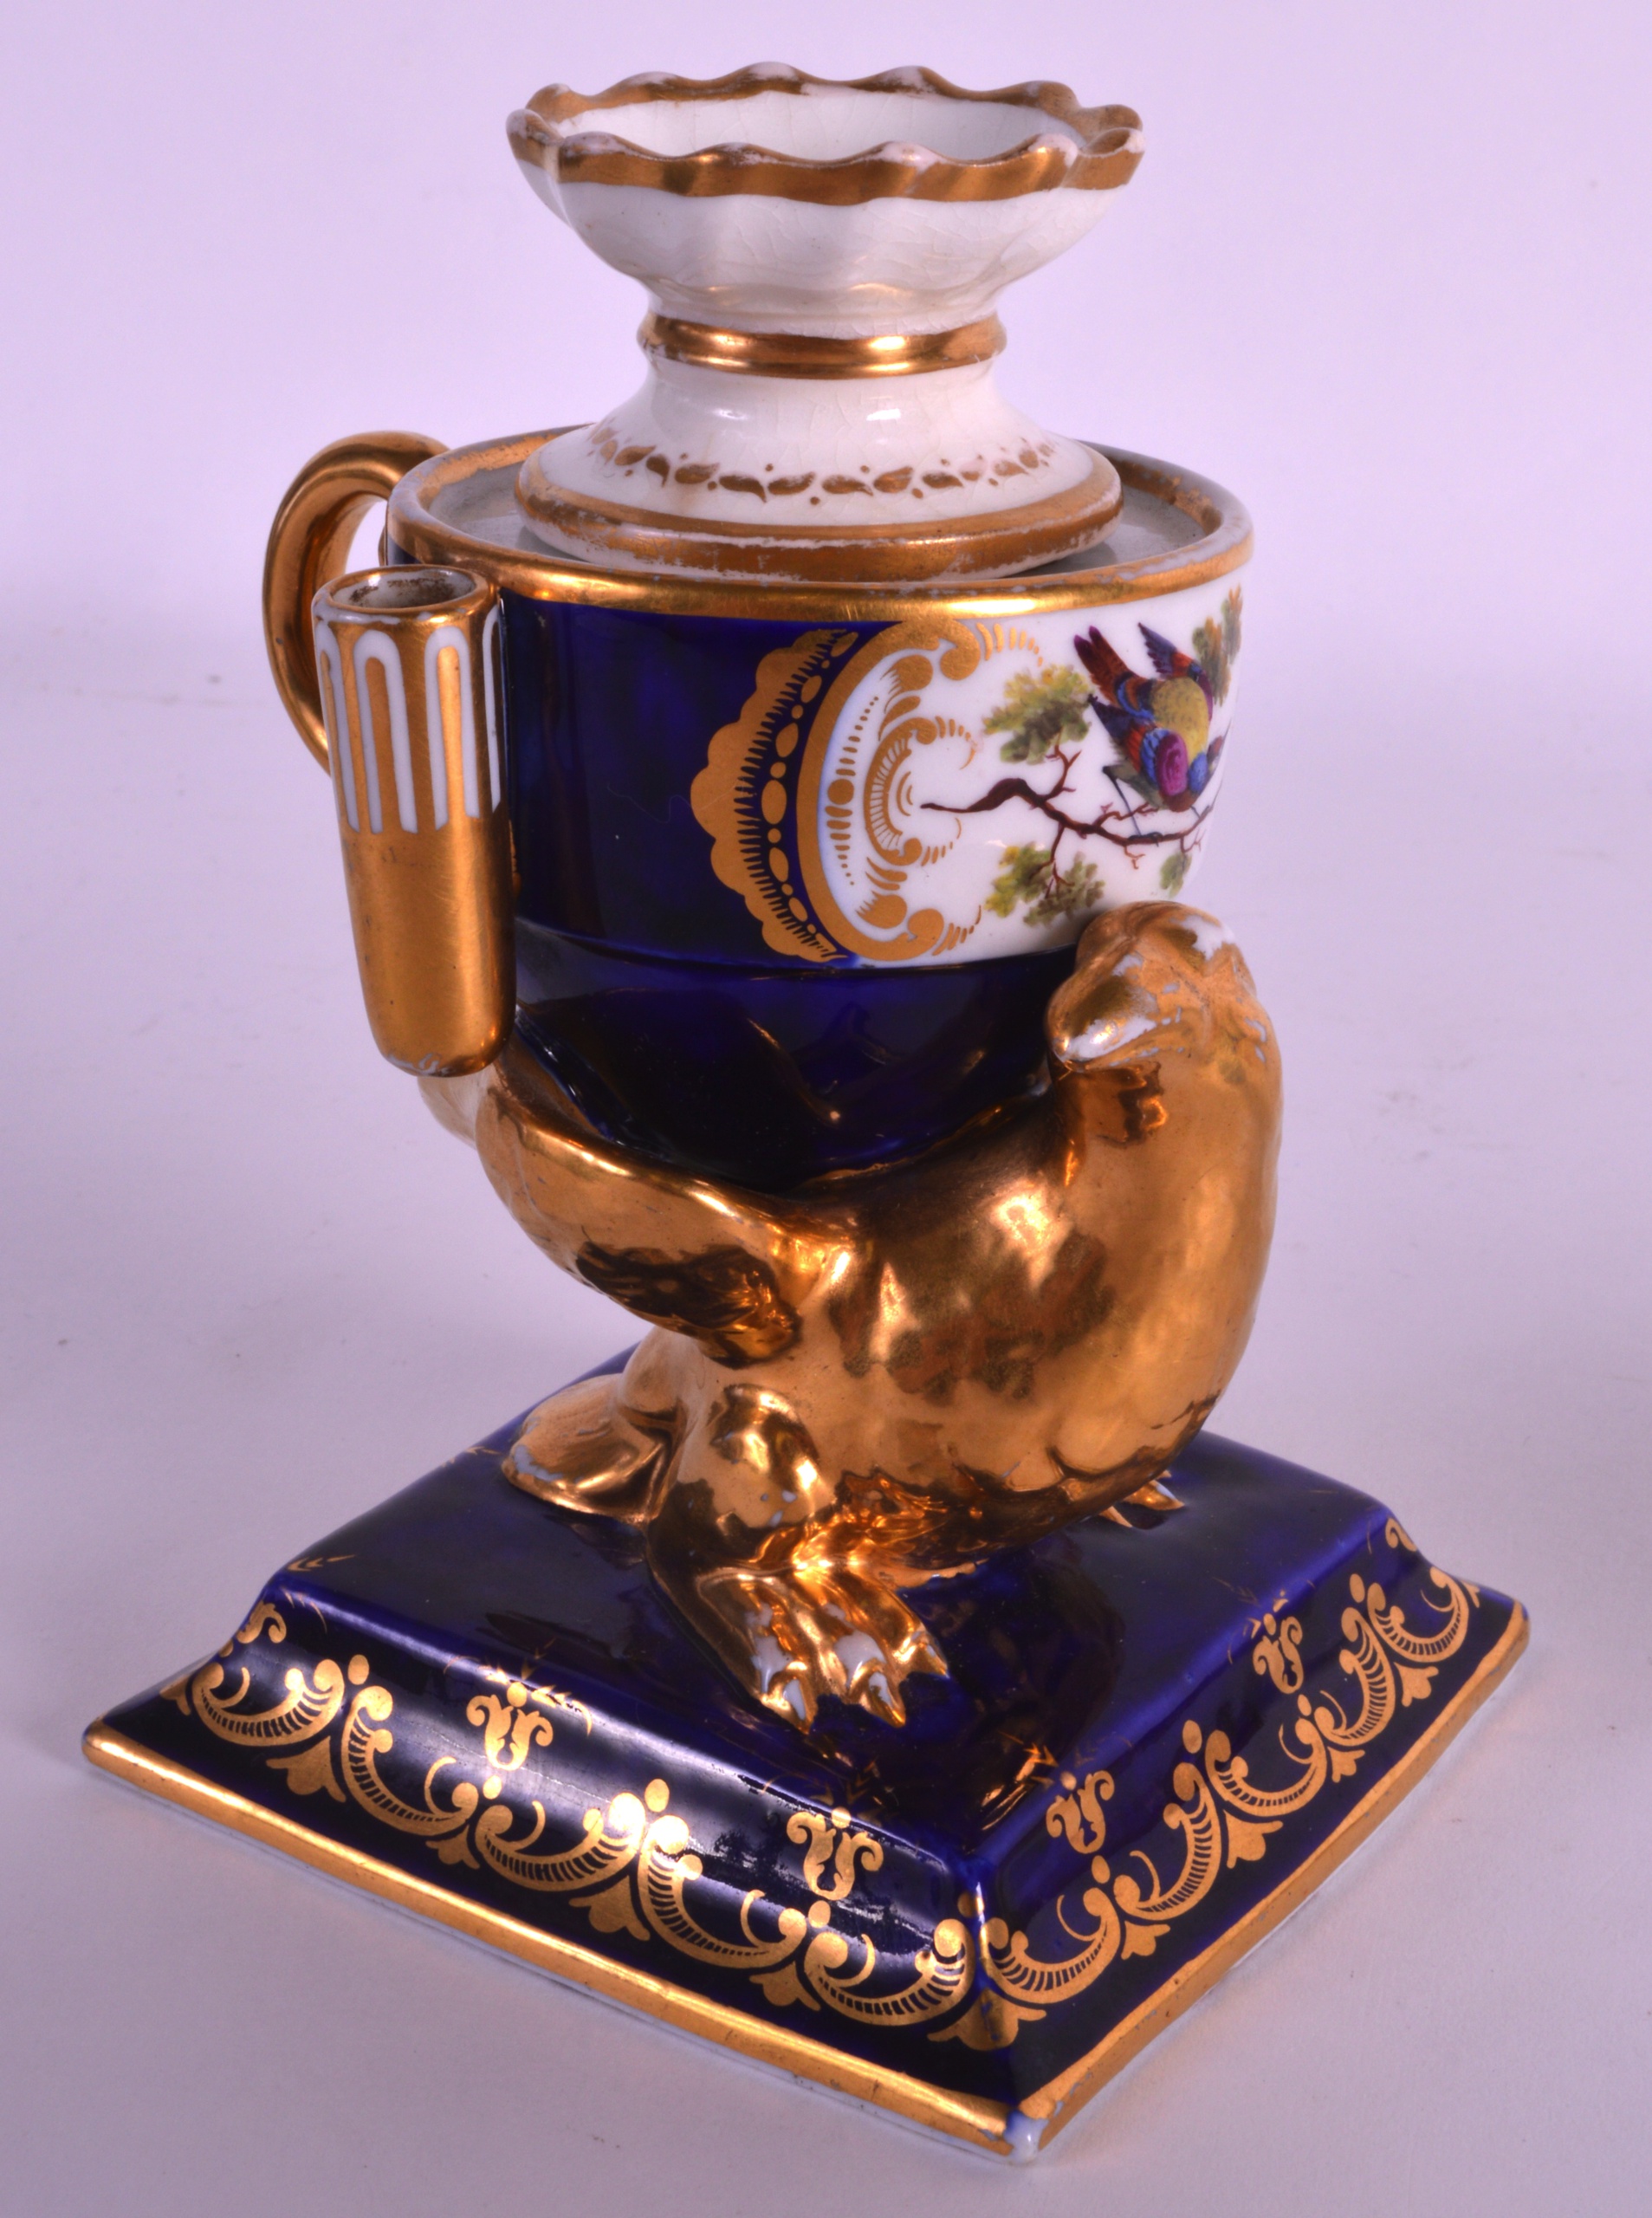 A FINE EARLY 19TH CENTURY CHAMBERLAINS WORCESTER INKWELL in the form of an eagle, probably painted